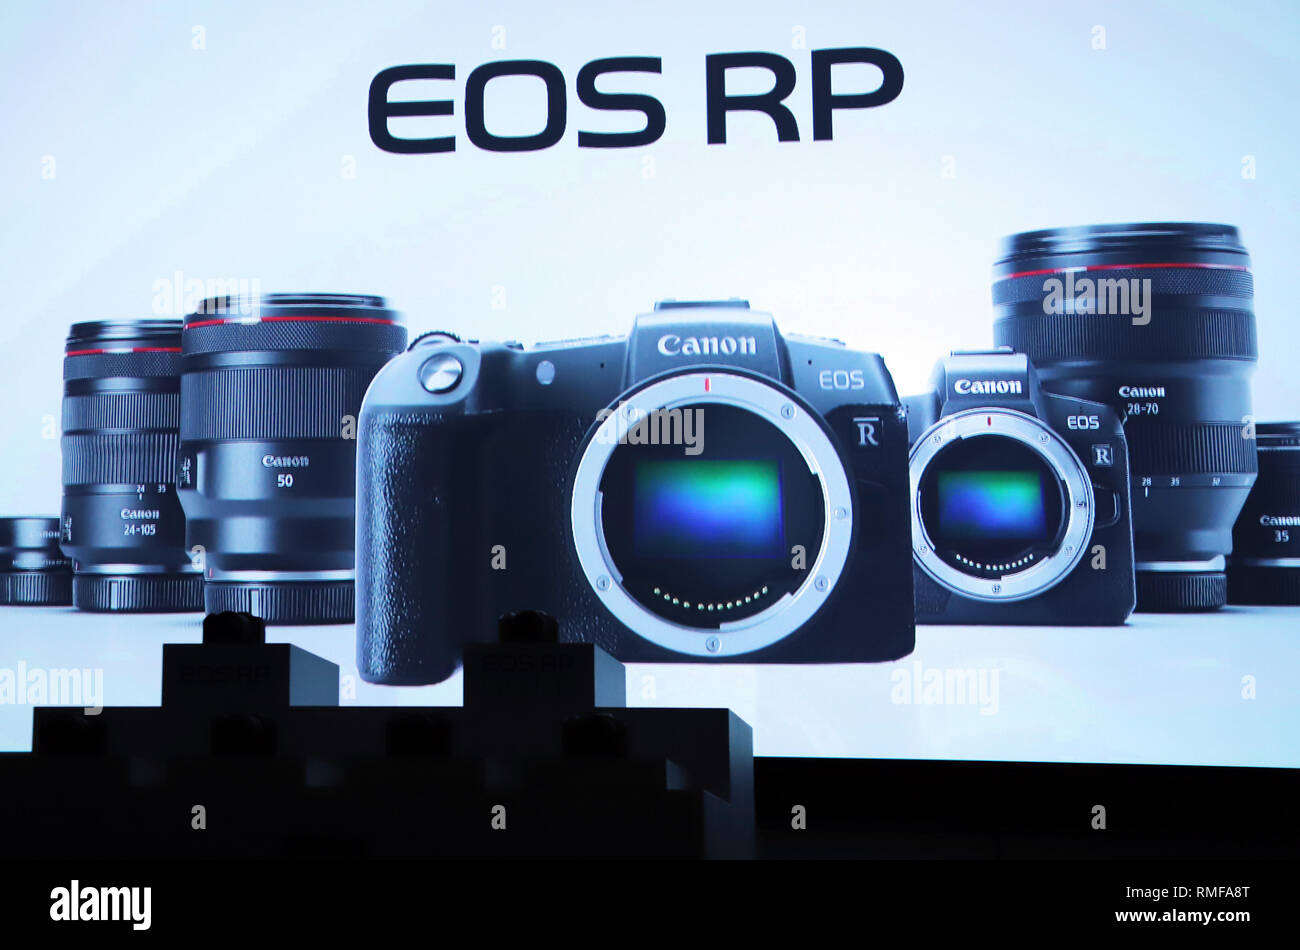 Tokyo, Japan. 14th Feb, 2019. Japan's camera giant Canon unveils the new mirroless digital camera 'EOS RP' at Canon Marketing's headquarters in Tokyo on Thursday, February 14, 2019. Canon will put the light weight, only 485g in weight, digital camera with 35mm sized 26.2 mega-pixel CMOS sensor on Japanedse market next month. Credit: Yoshio Tsunoda/AFLO/Alamy Live News Stock Photo